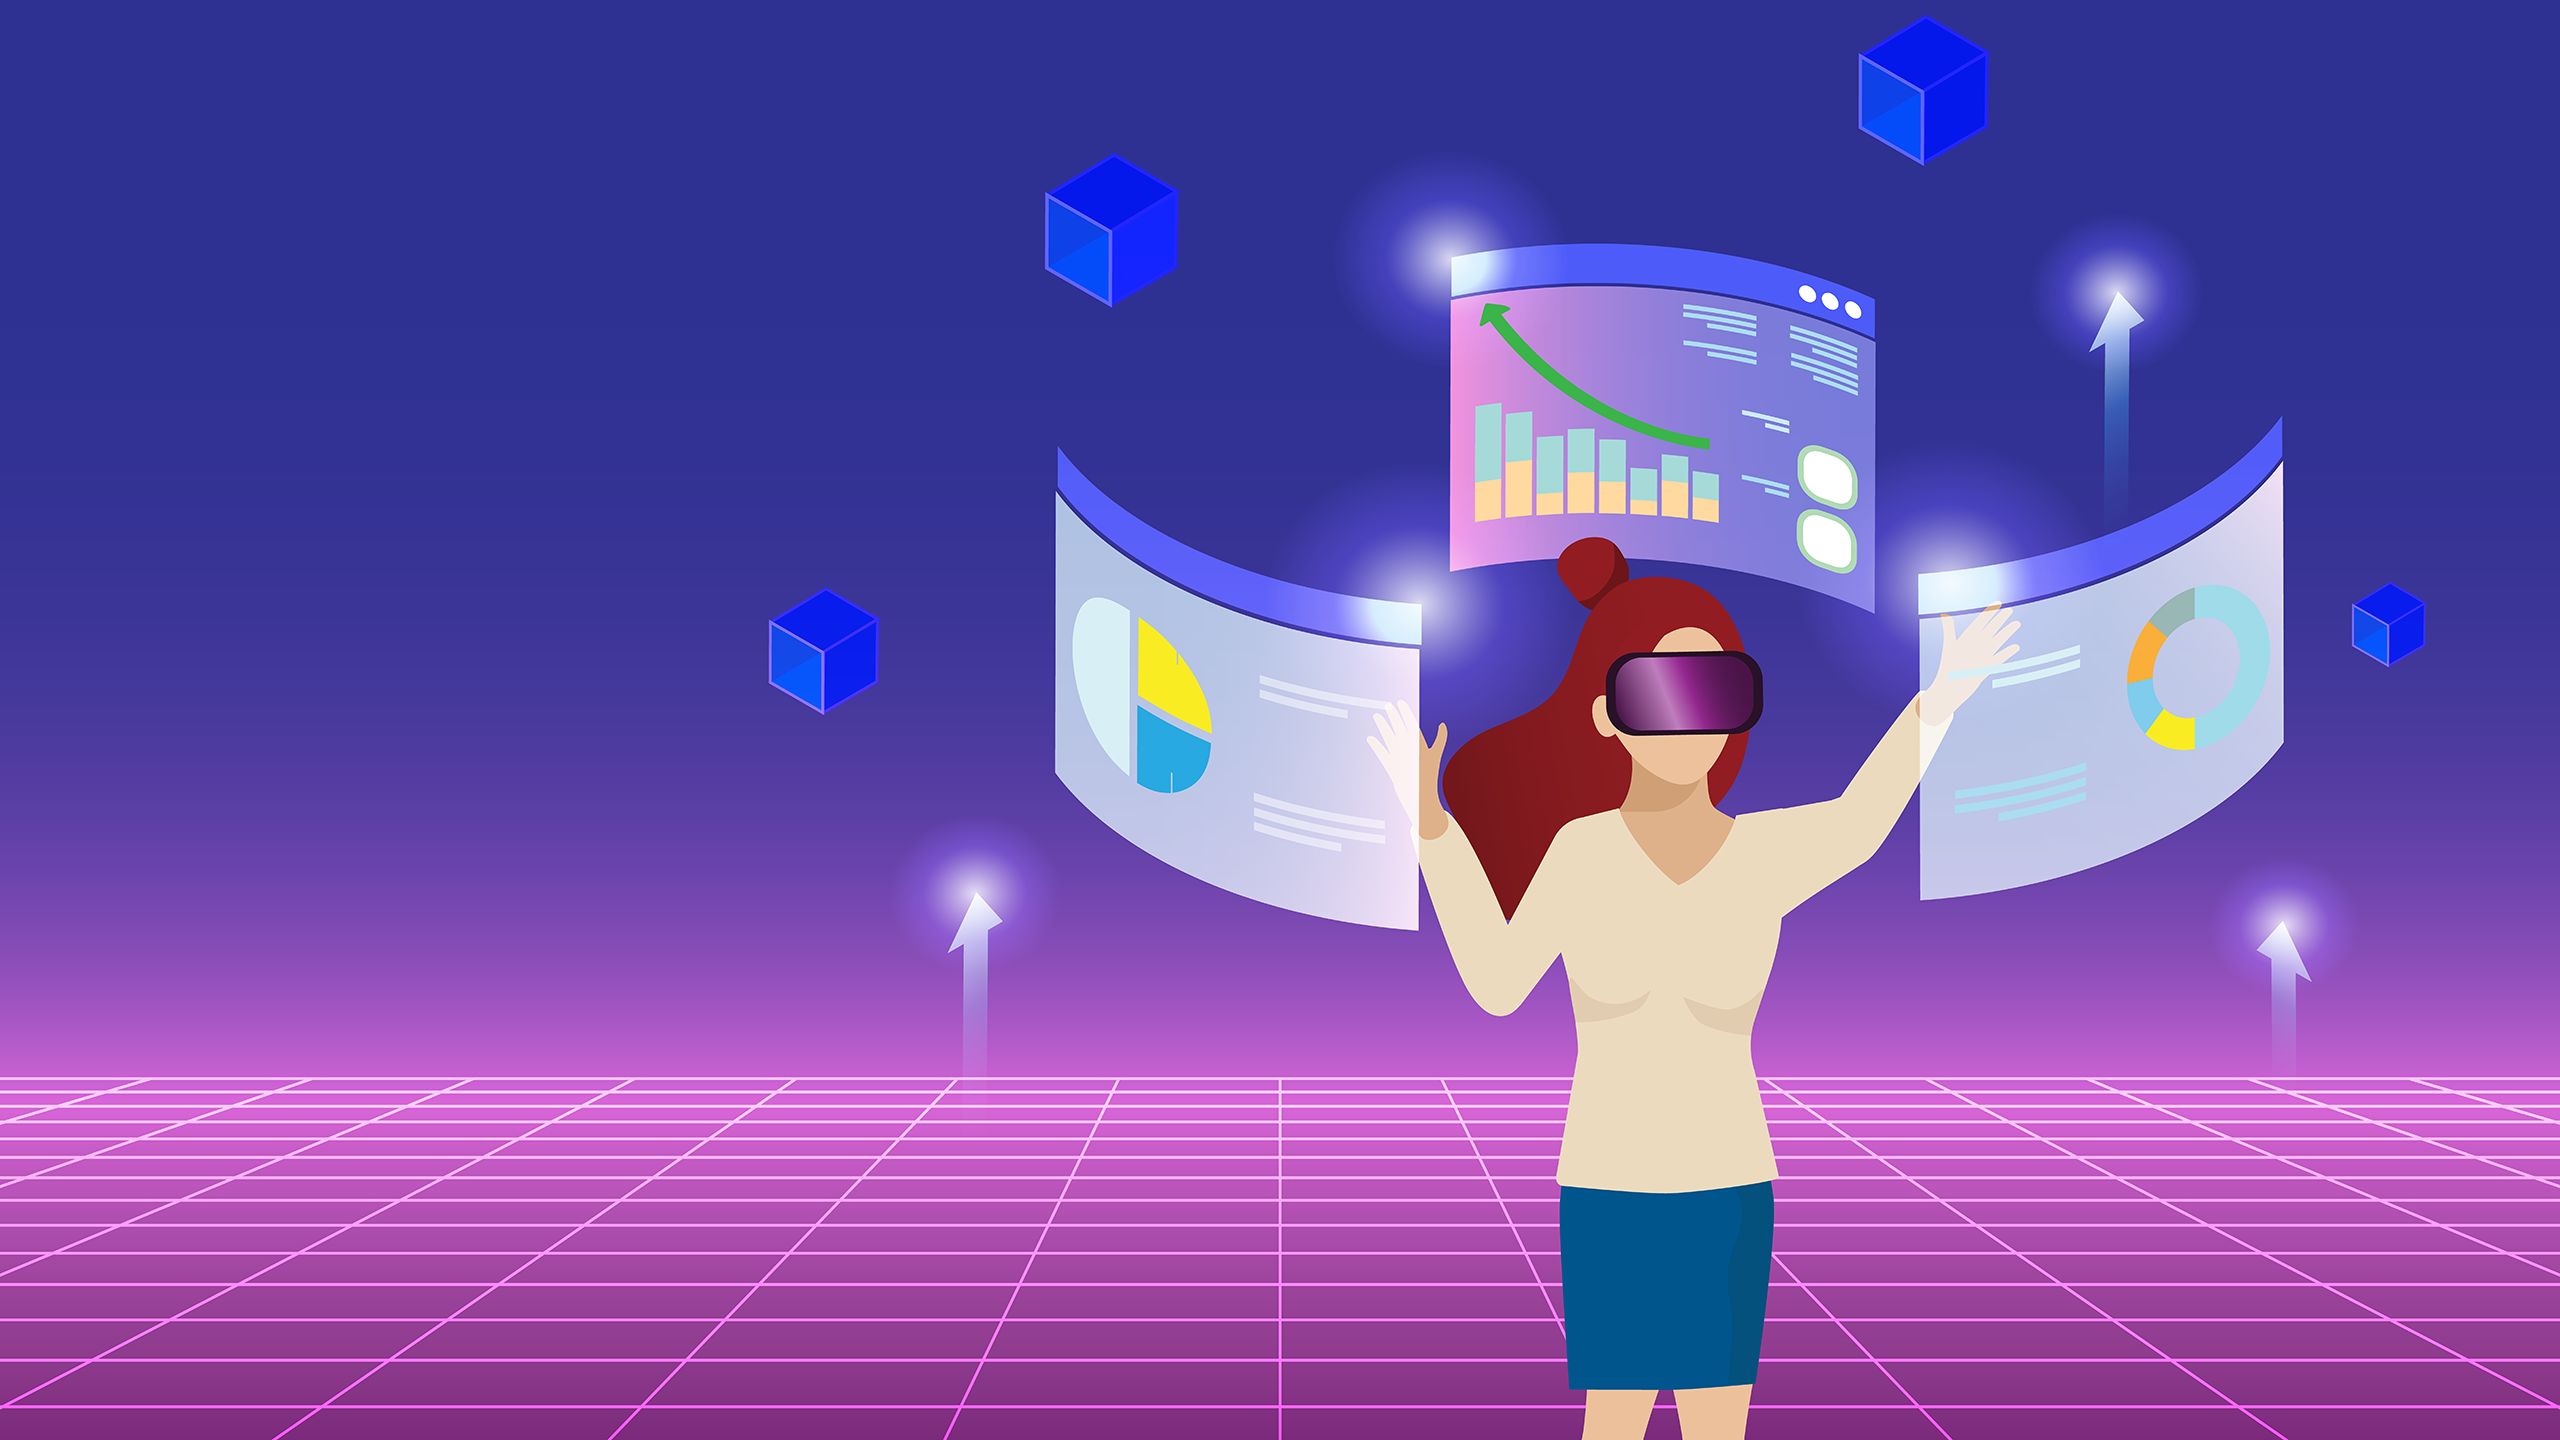 An illustration of a woman wearing a virtual reality headset with three screens around her to represent the metaverse workplace